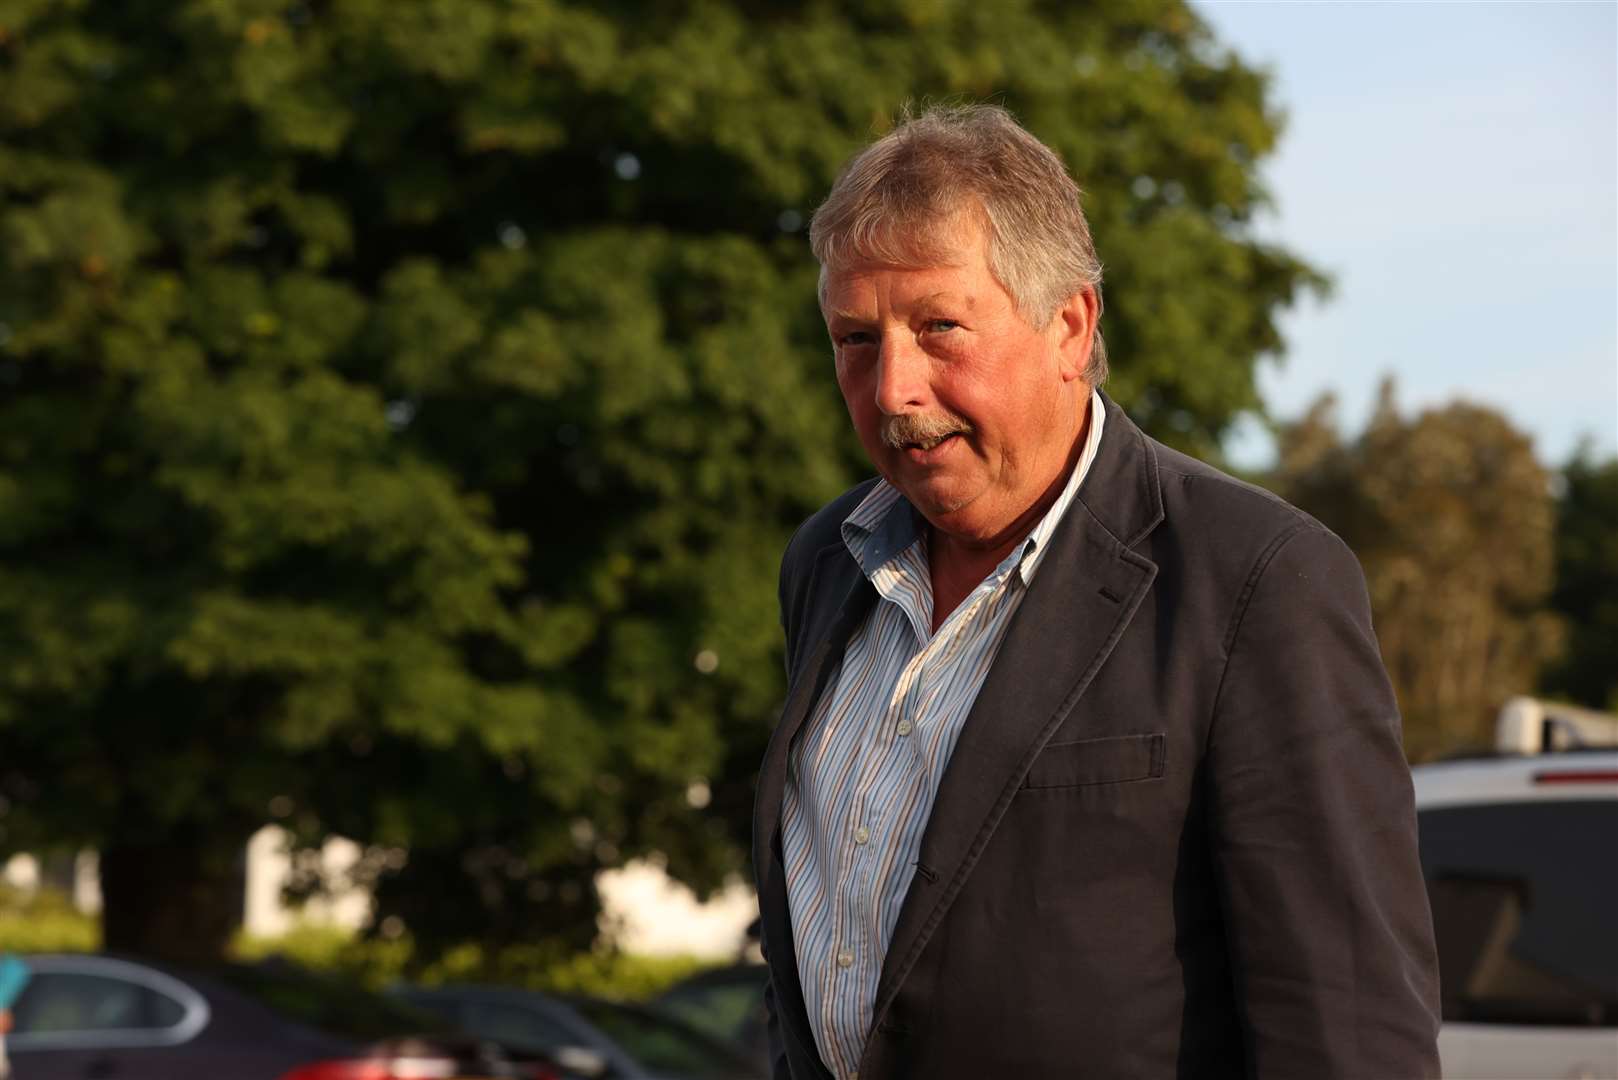 DUP MP Sammy Wilson warned that the Government’s immigration policy risked hastening the day when ‘people controls’ existed between NI and GB (Liam McBurney/PA)